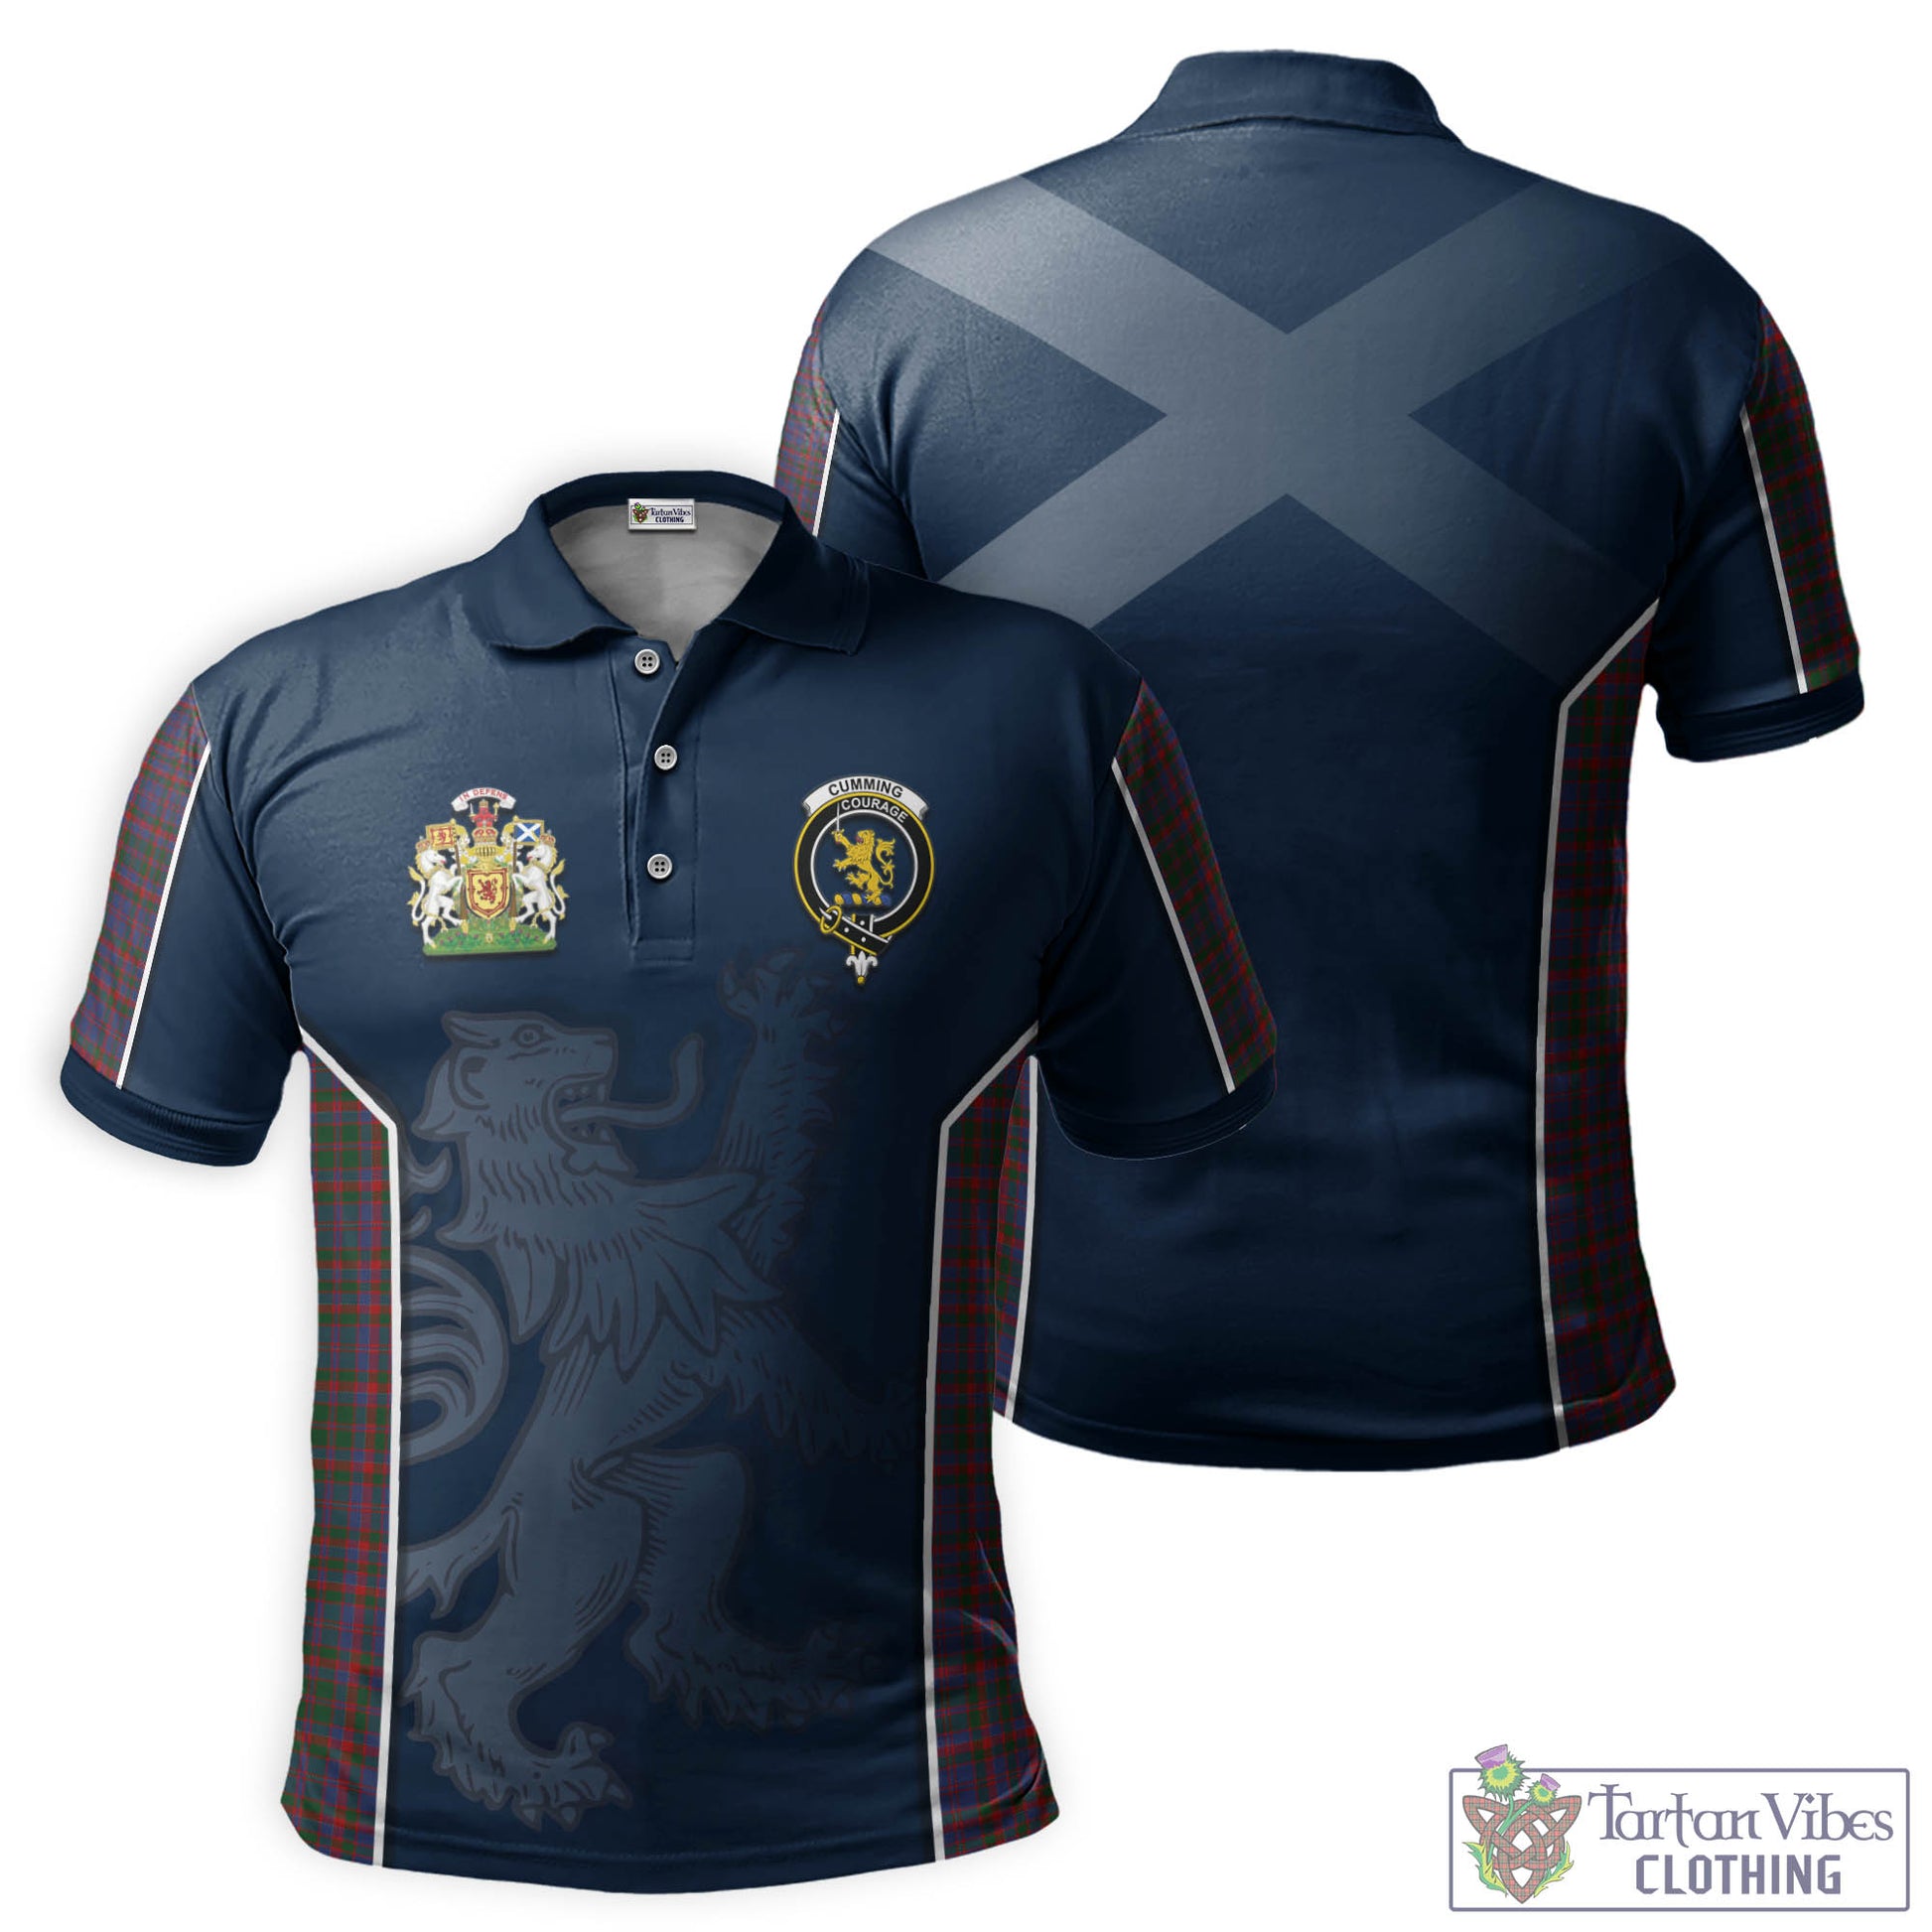 Tartan Vibes Clothing Cumming Tartan Men's Polo Shirt with Family Crest and Lion Rampant Vibes Sport Style